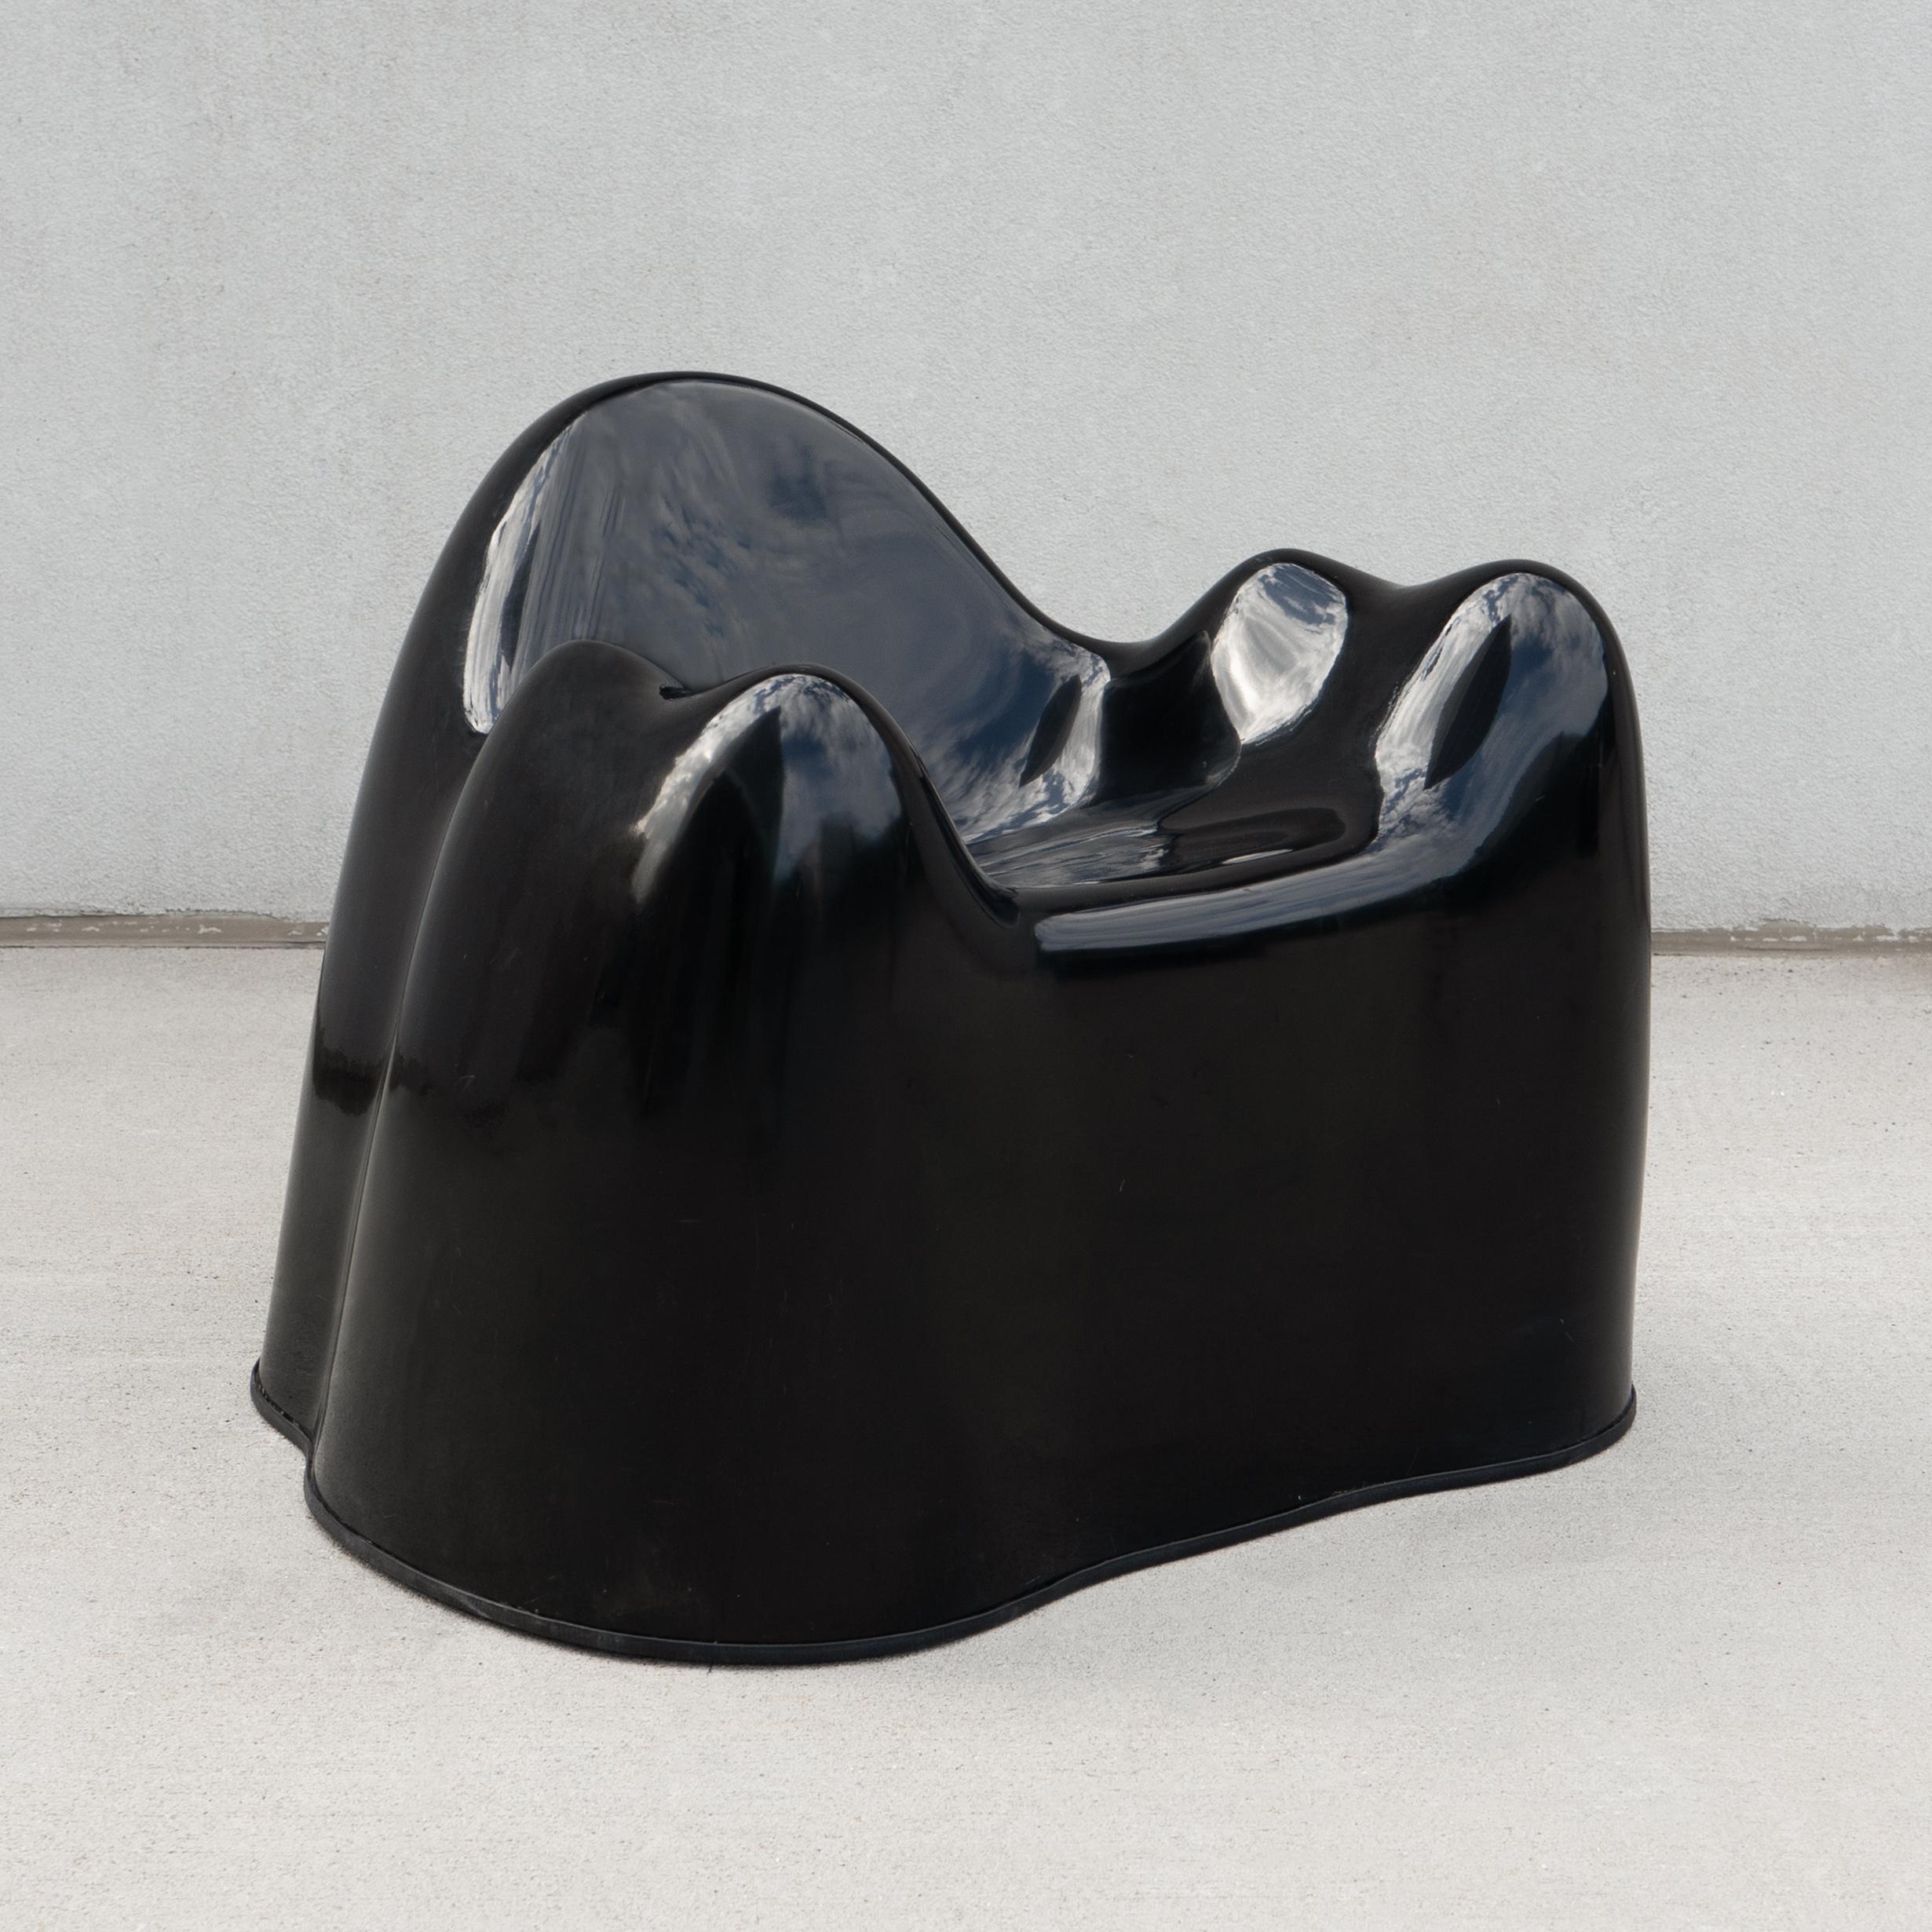 Space Age Pair Molar Chairs by Wendell Castle 1970s, gel-coated fiberglass space age mod For Sale